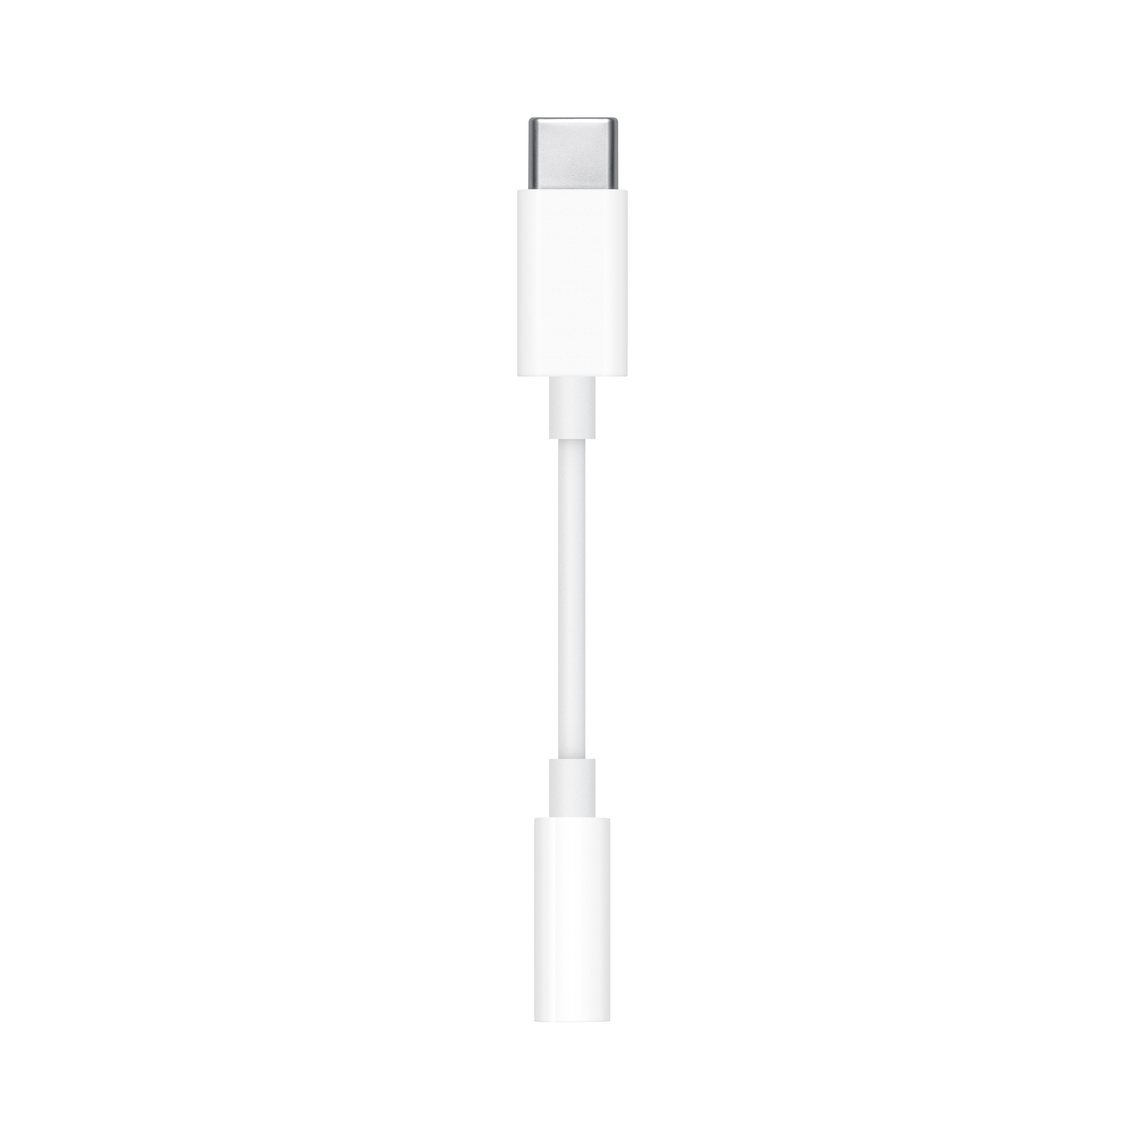 The USB-C to 3.5mm Headphone Jack Adapter lets you connect devices that use a standard 3.5mm audio plug to your USB-C devices.